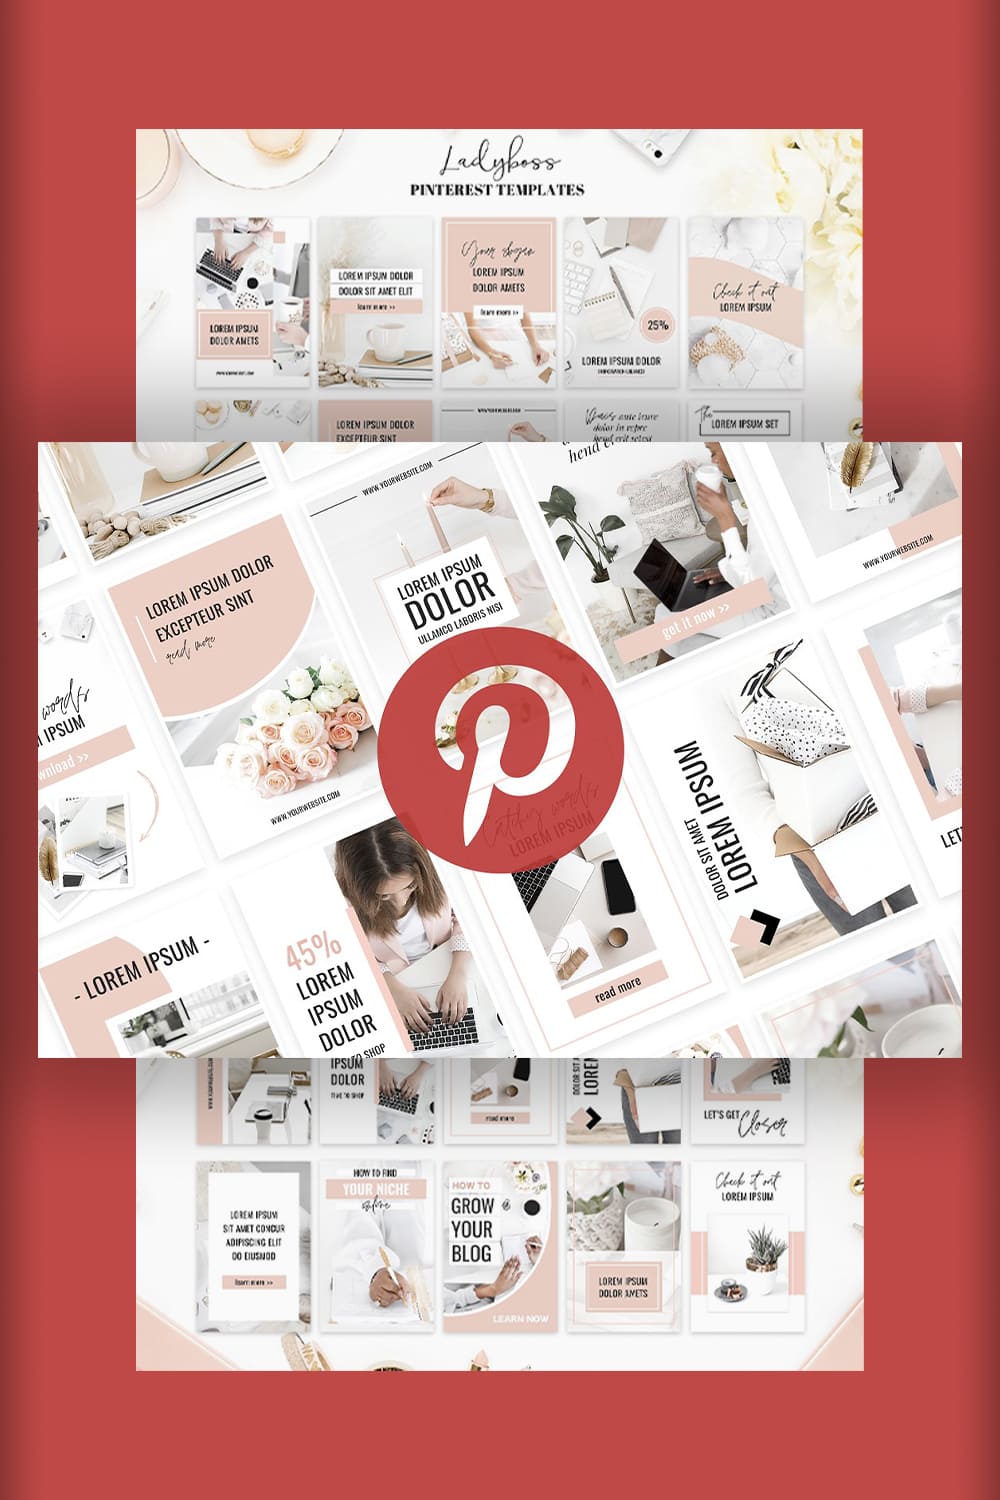 Nice template for Pinterest.